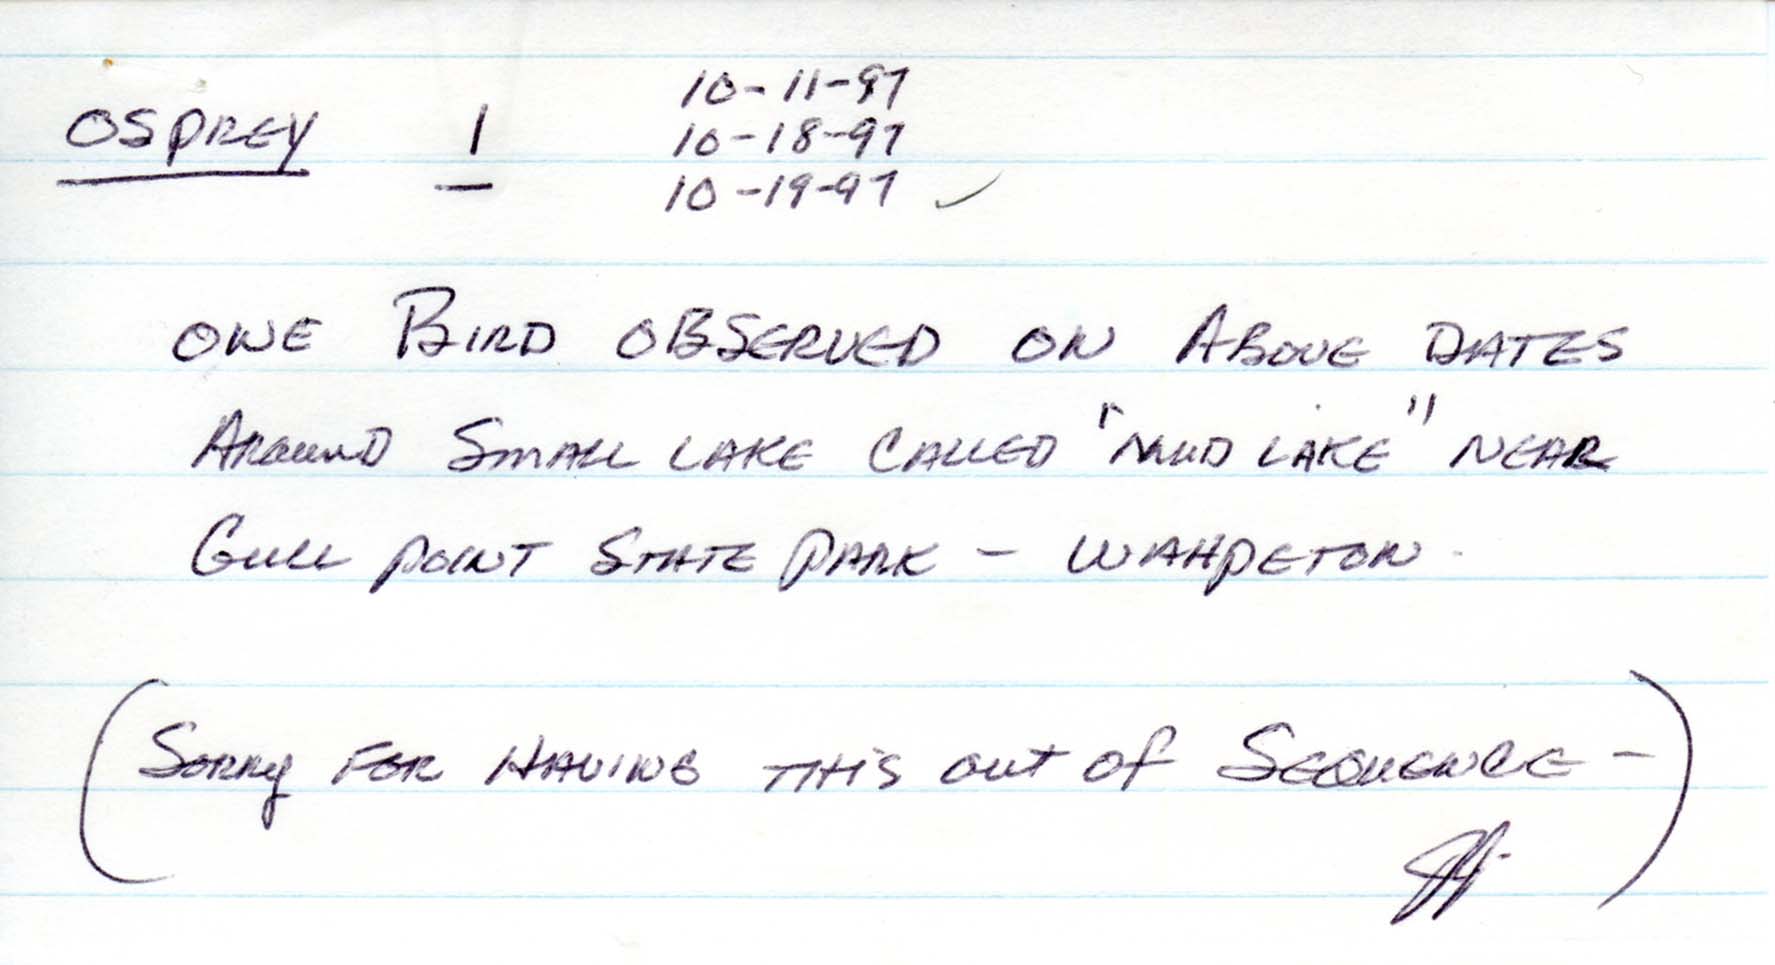 Field reports form for submitting seasonal observations of Iowa birds, Jack Jones, fall 1997